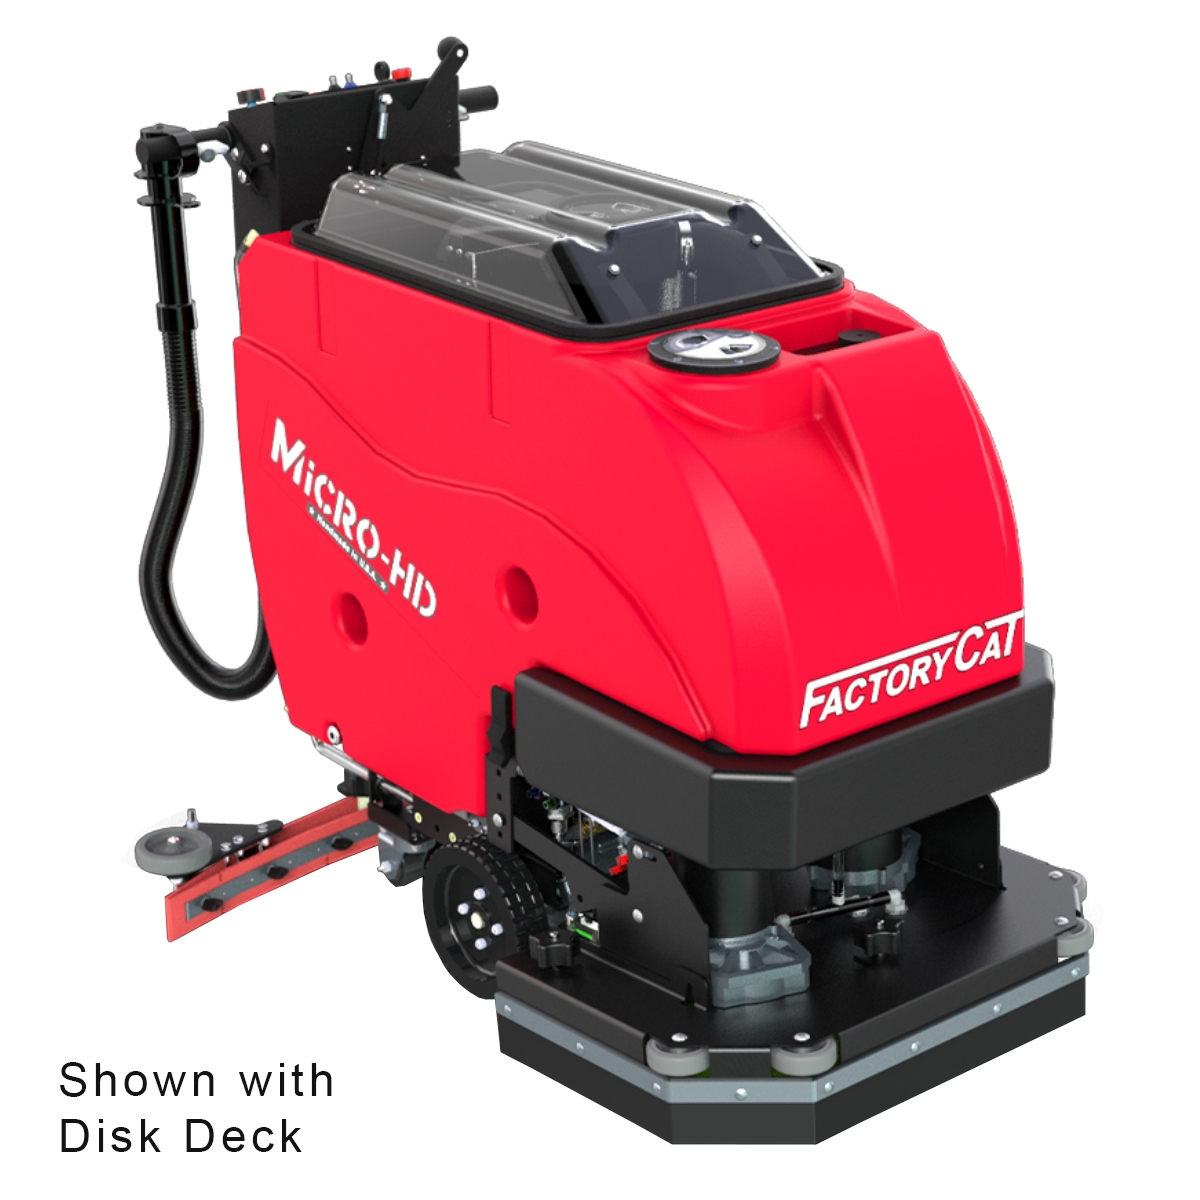 FactoryCat MICRO-HD Floor Scrubber is known for 
its simple design and durable construction, it is sitting 
at an angle showing a 3/4 view of the bright red and black machine.